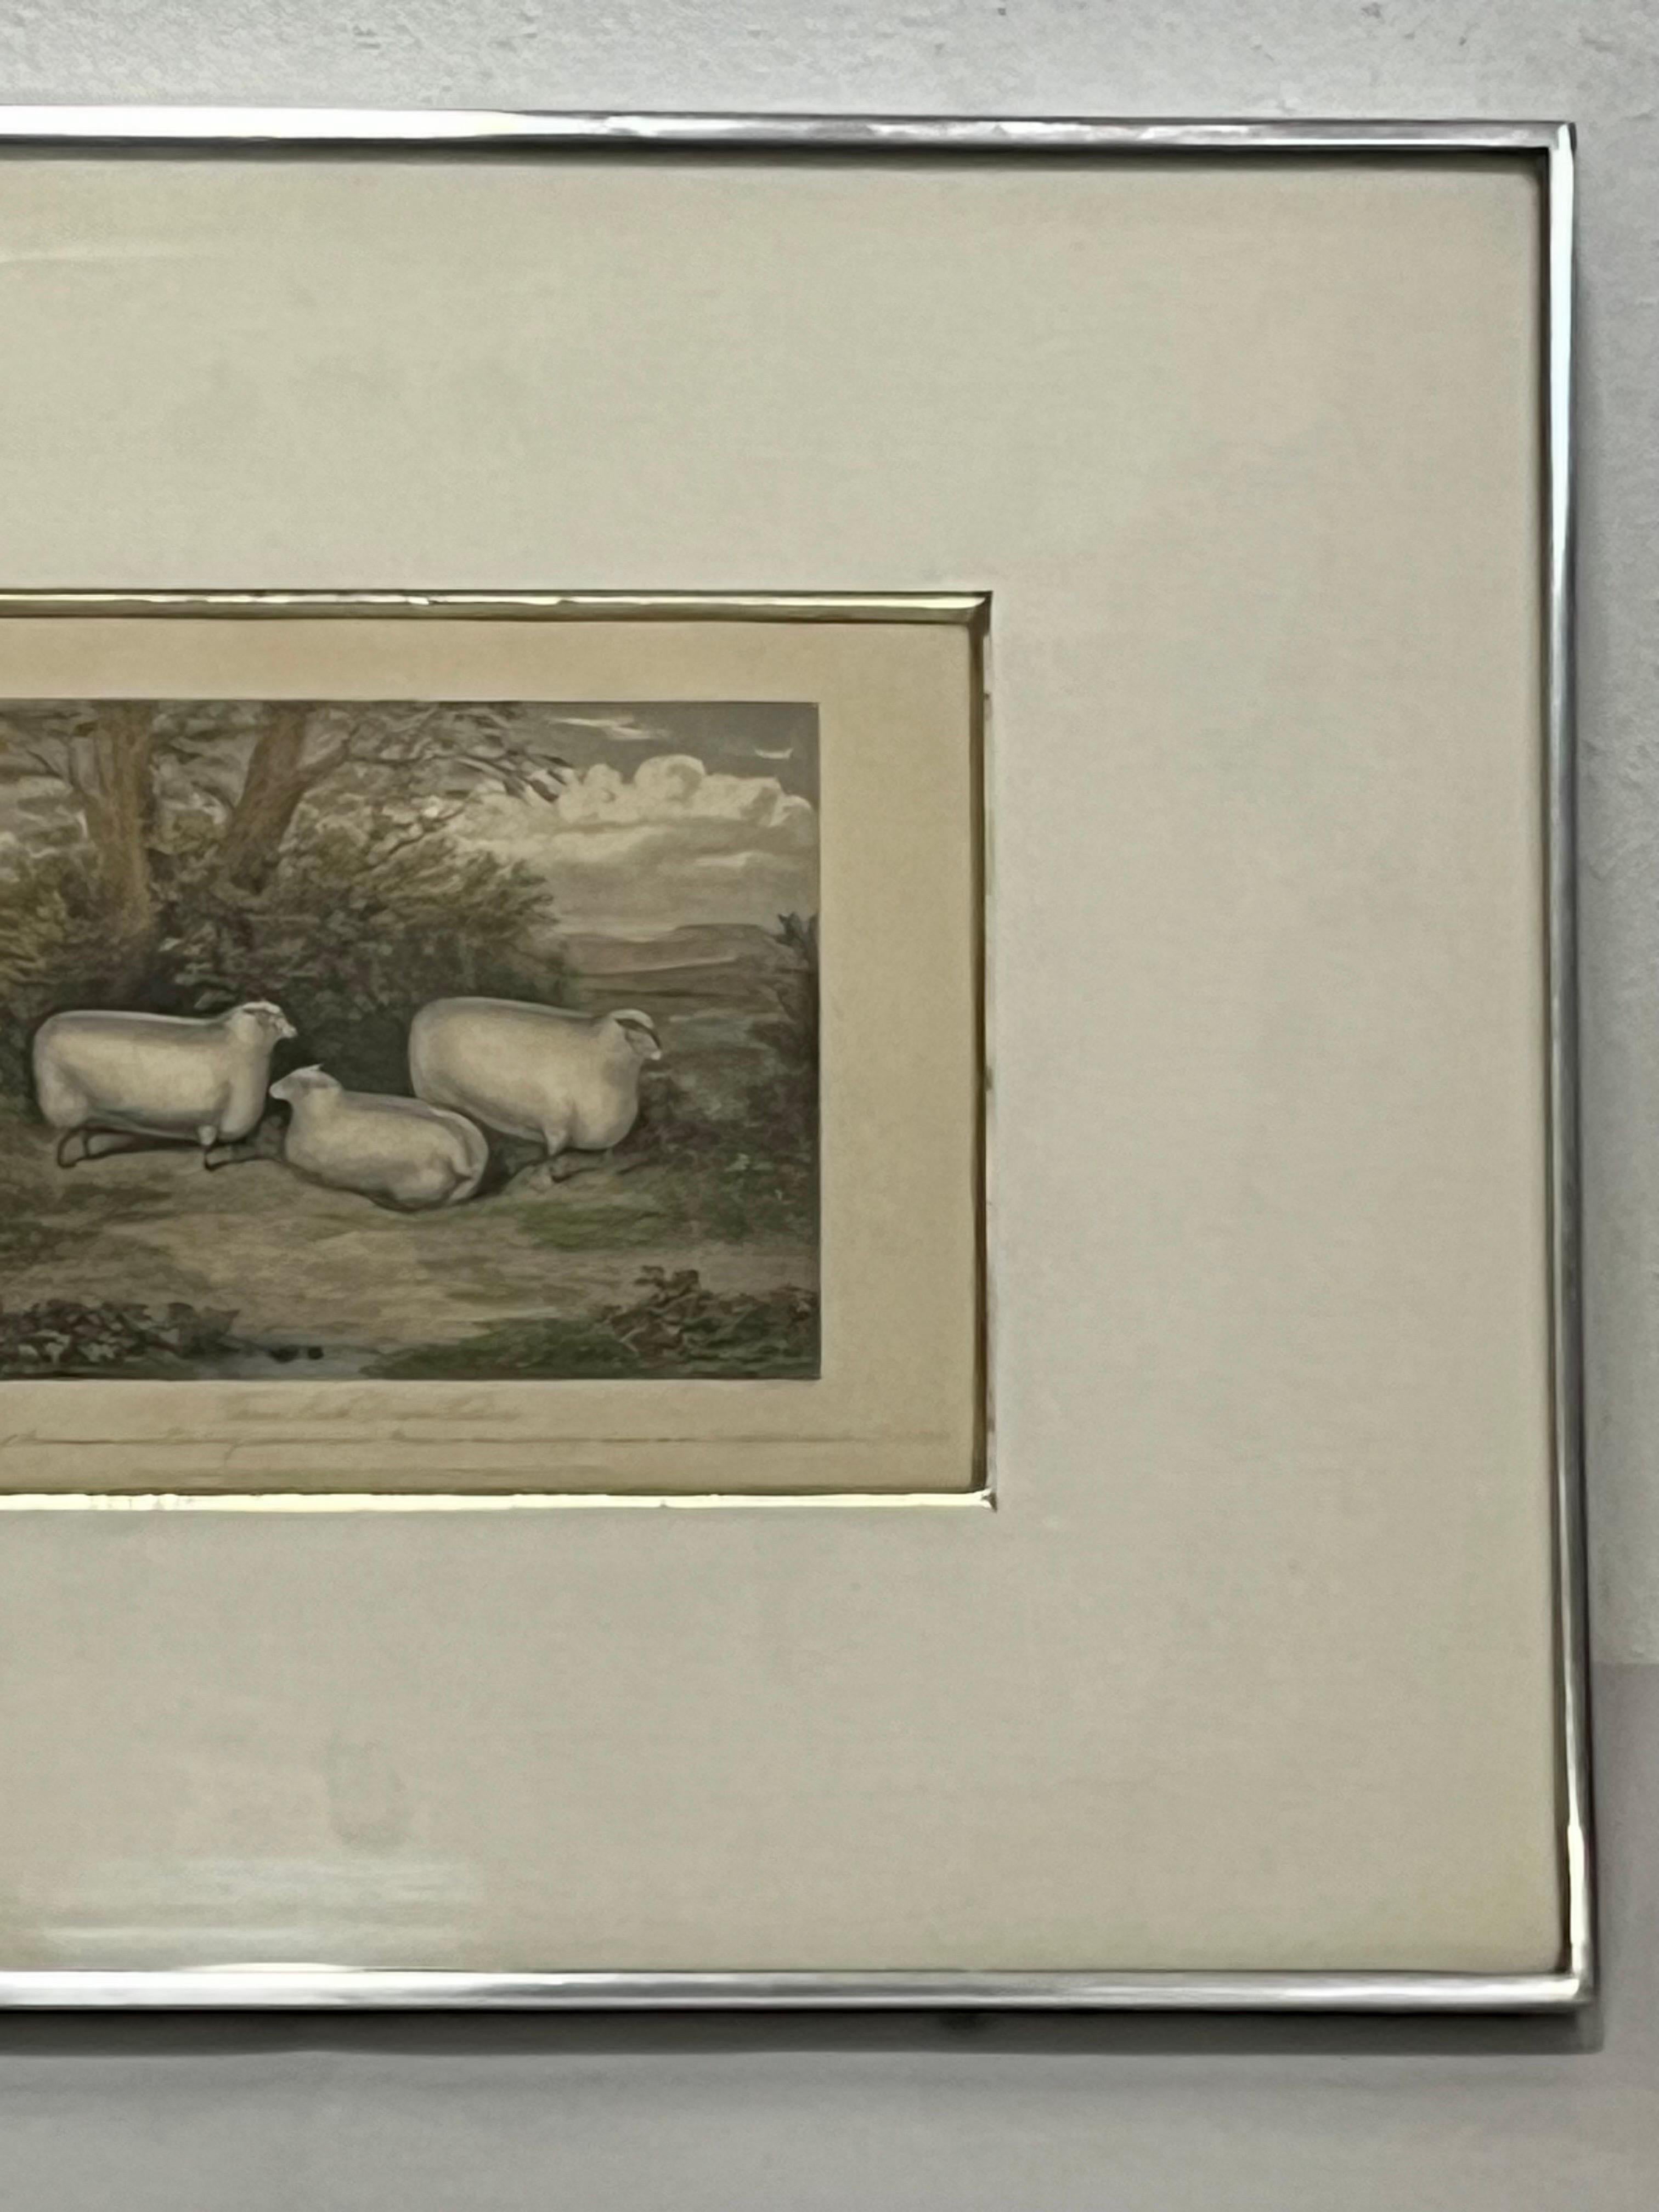 Metal 19th C English Print by H. Strafford of Three South Down Wethers Kulicke Frame For Sale